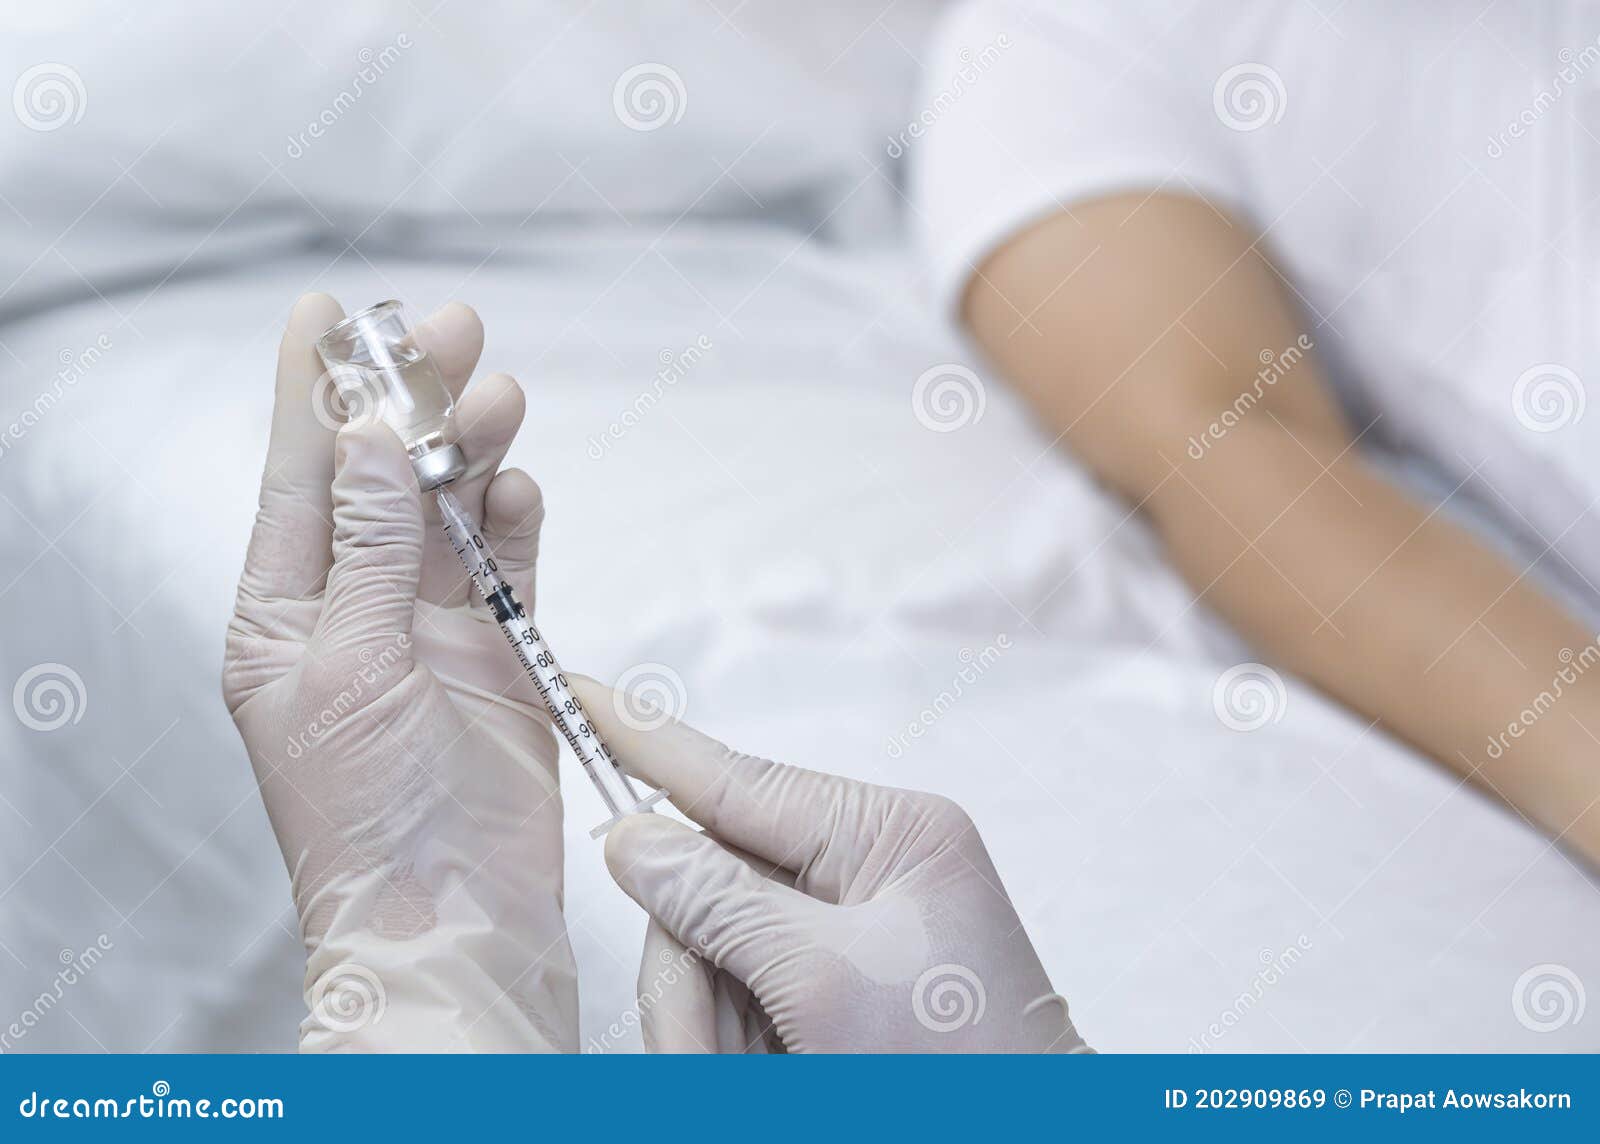 Doctor S Hand Holding Draw Syringe With Vial For Injection Into Patient